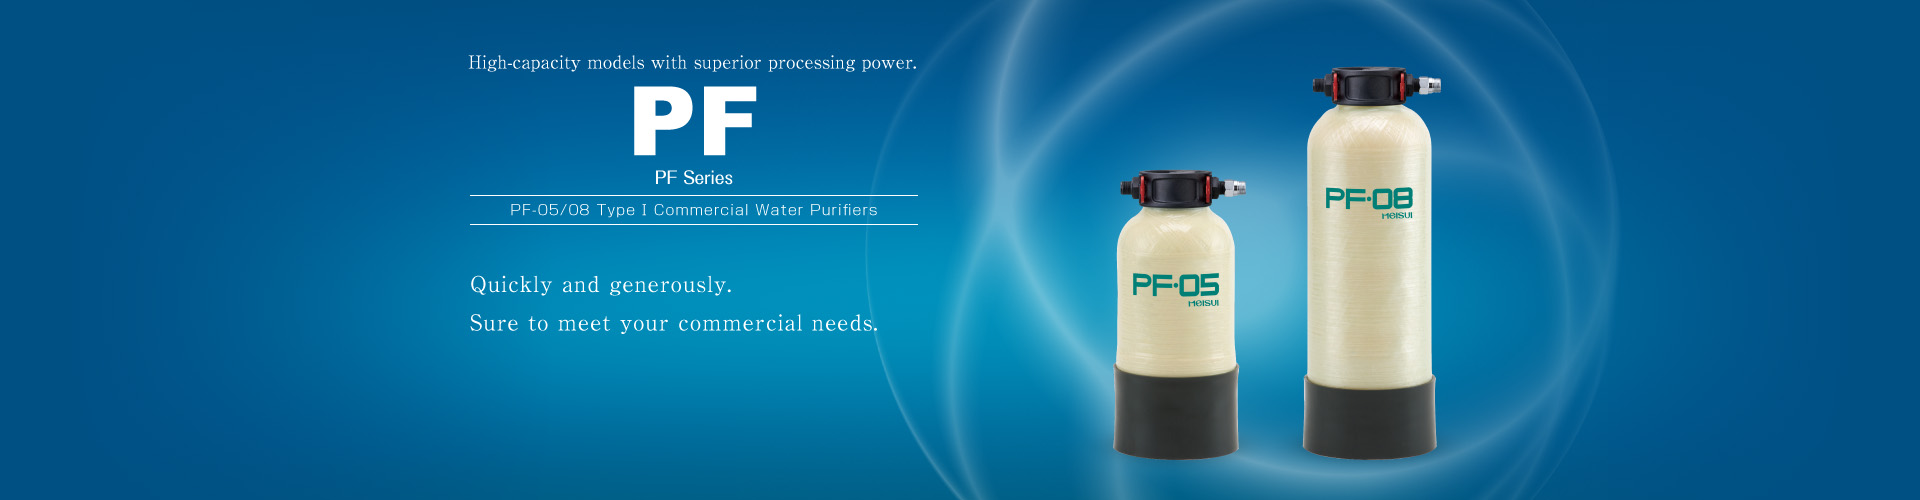 PF Series Type I Commercial Water Purifiers